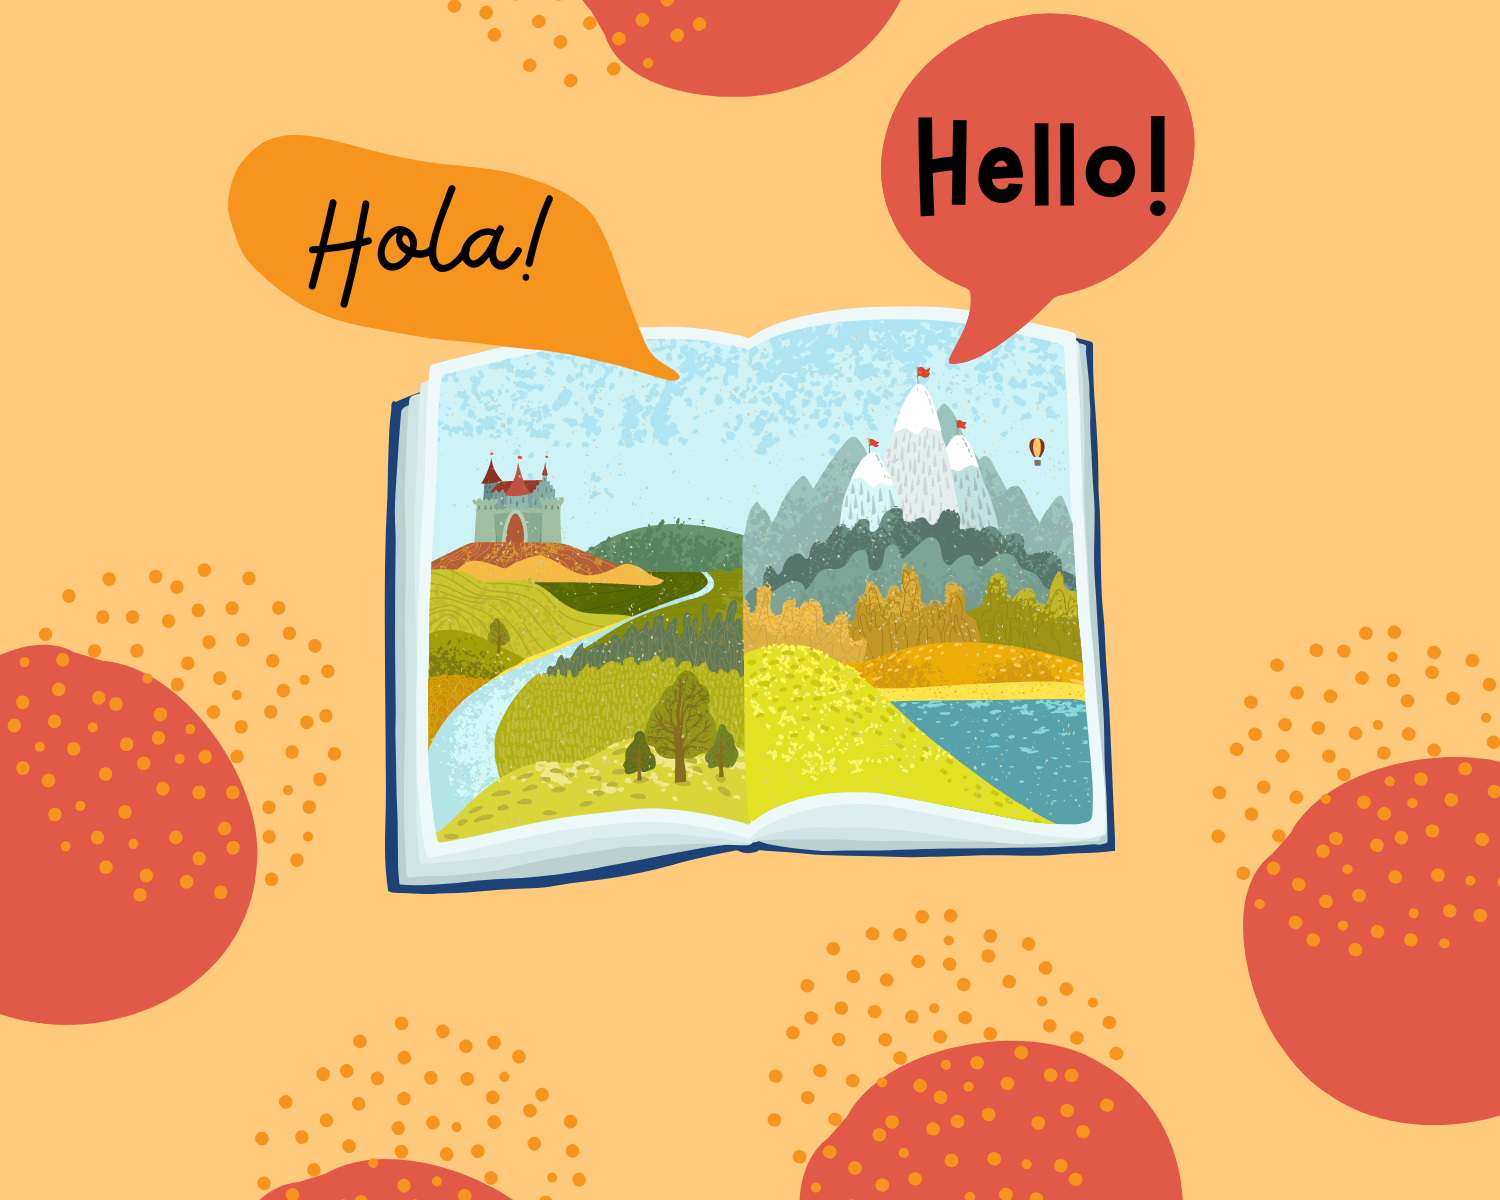 illustration of a picture book laying open with two speech bubbles that read "Hello!" and "Hola!" above it